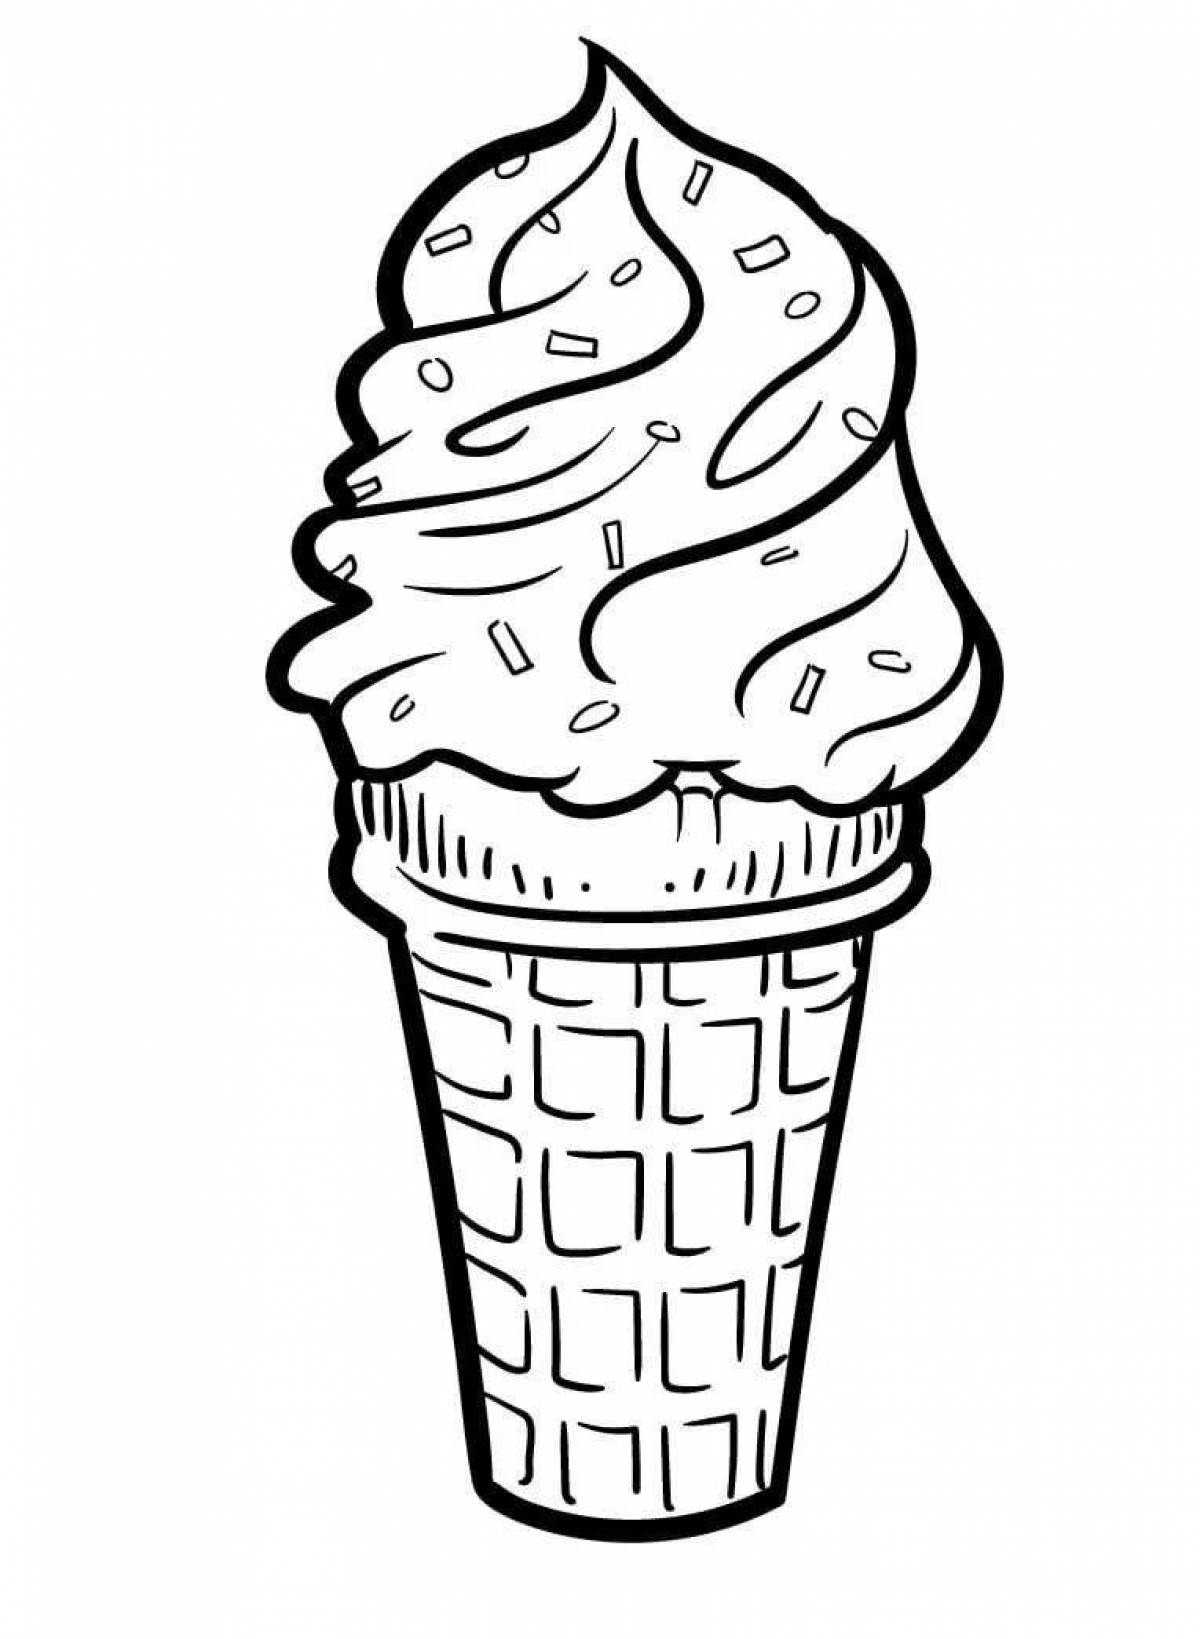 Amazing ice cream coloring page for the little ones